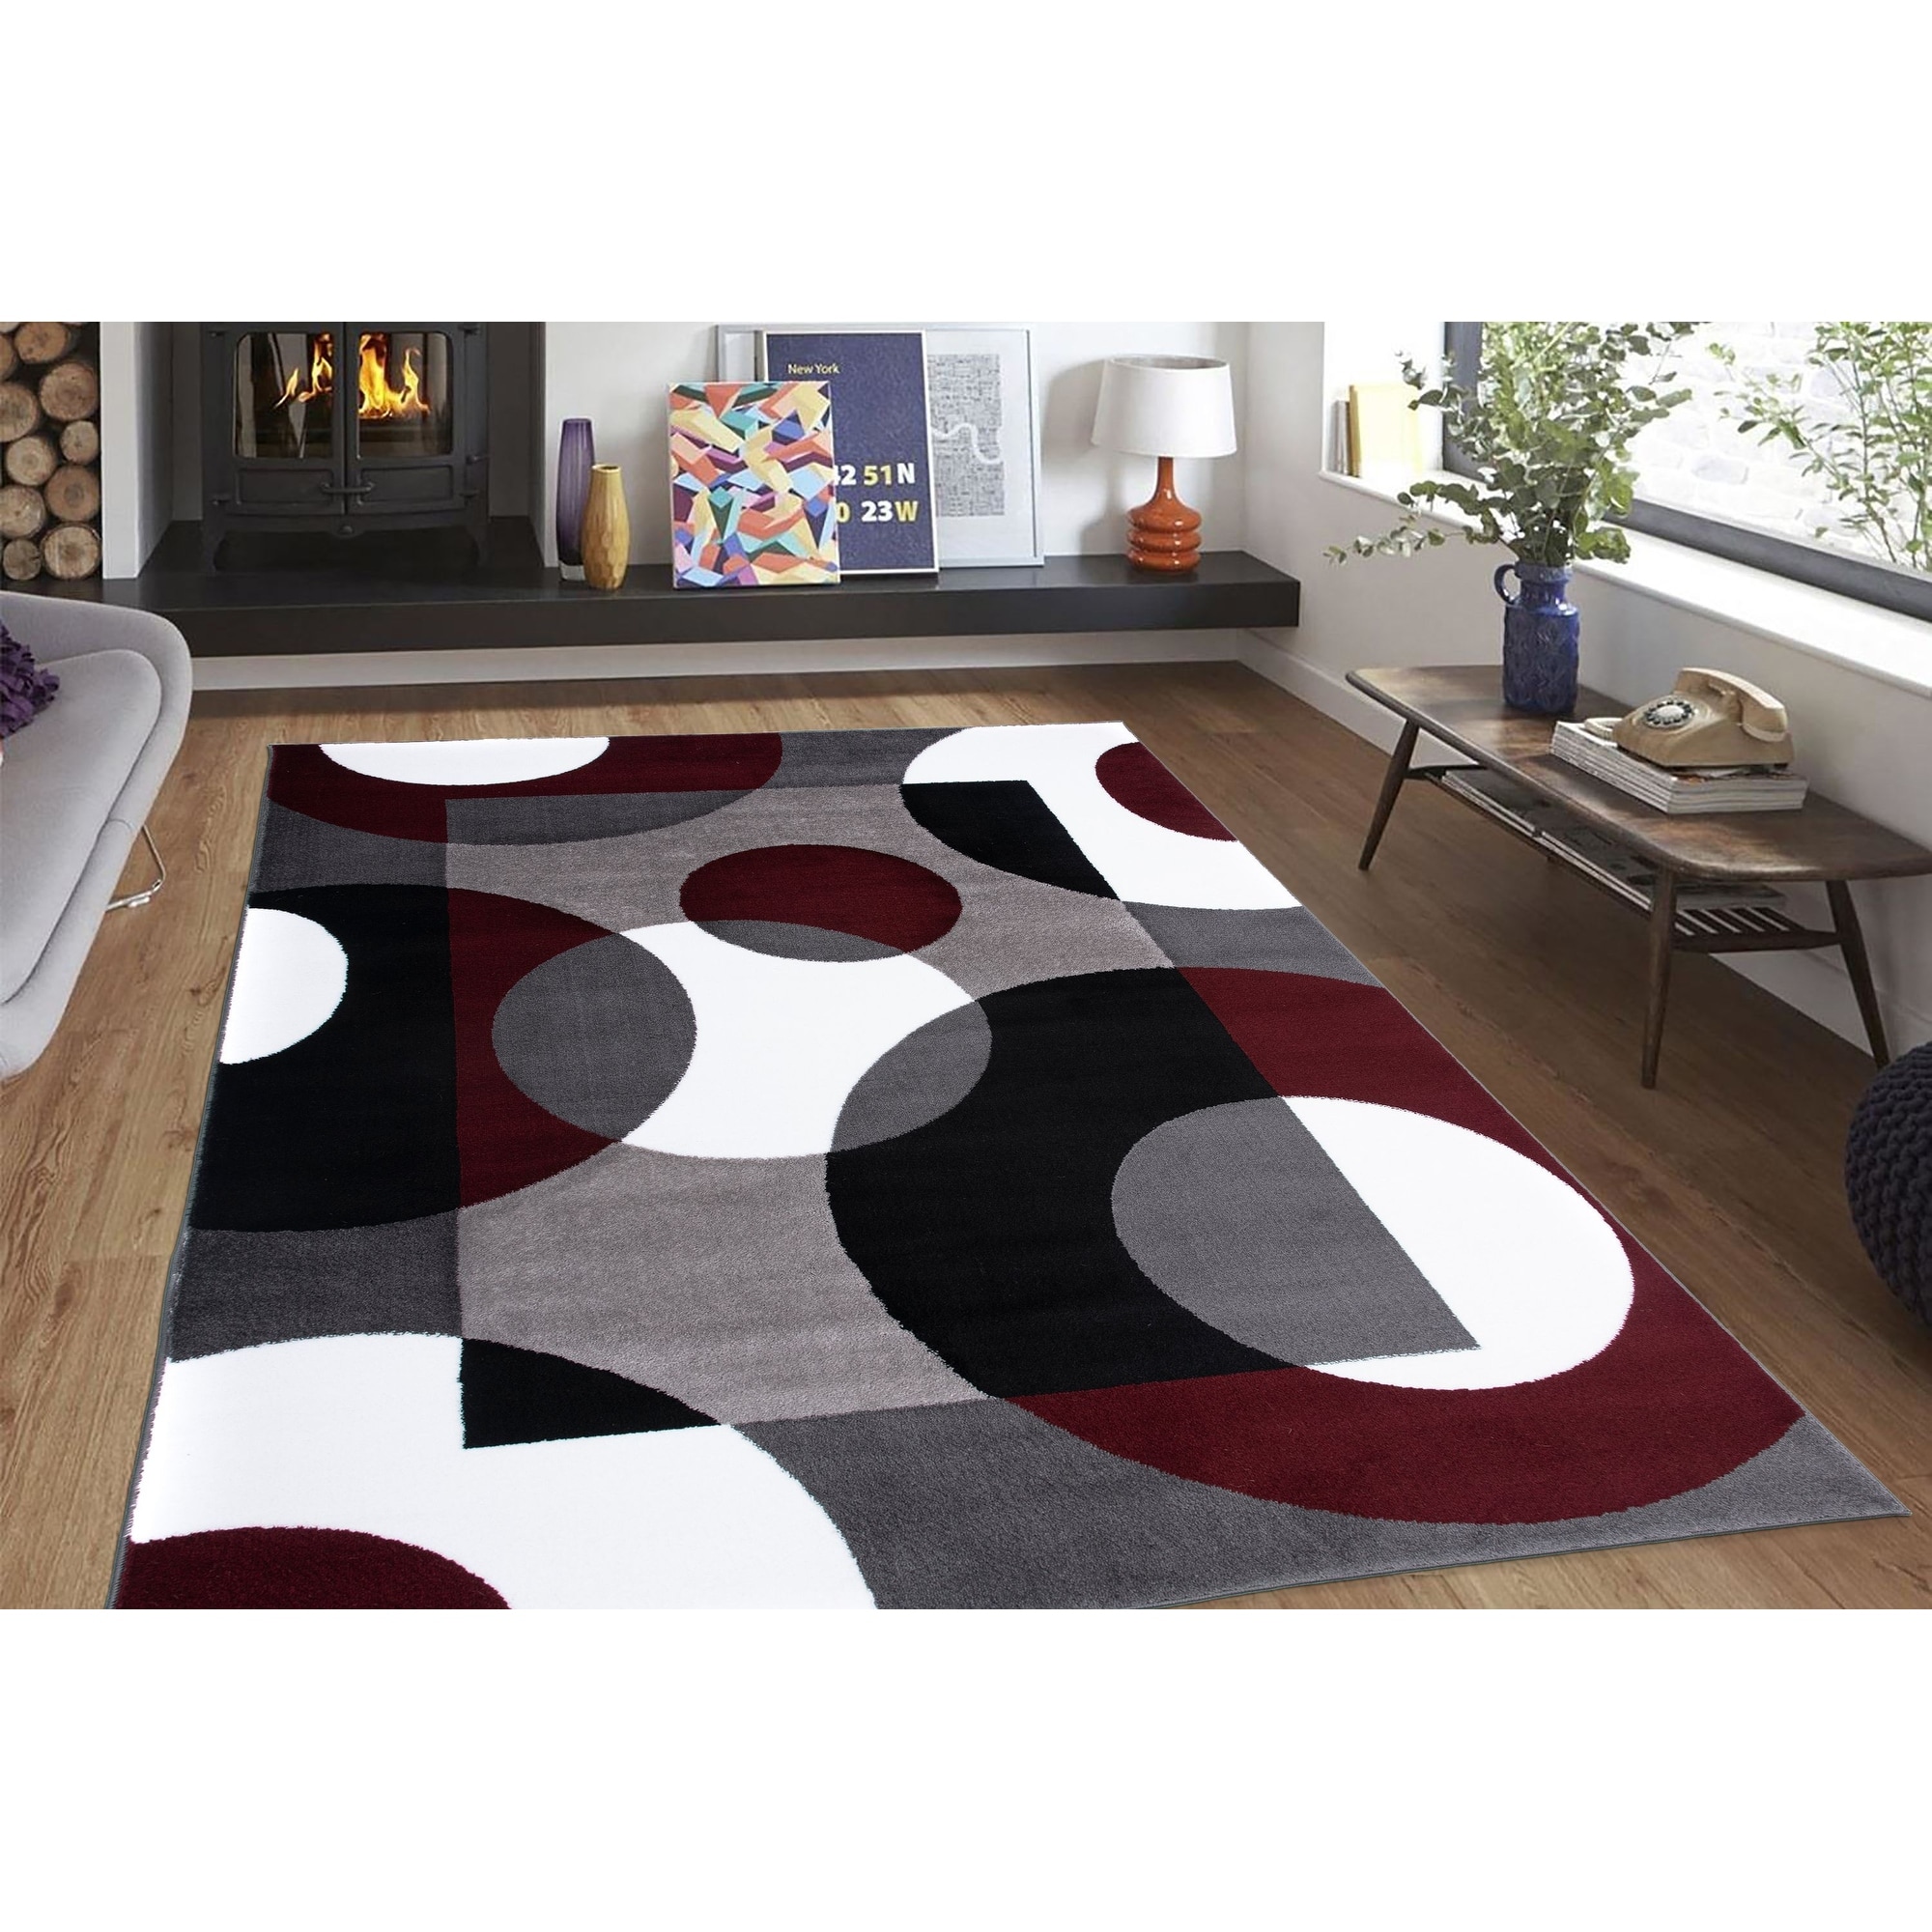 4 x 6 actual is 3'.8''x5' Summit 15 New Area Rug Burgundy Beige Modern Abstract Many Sizes Available